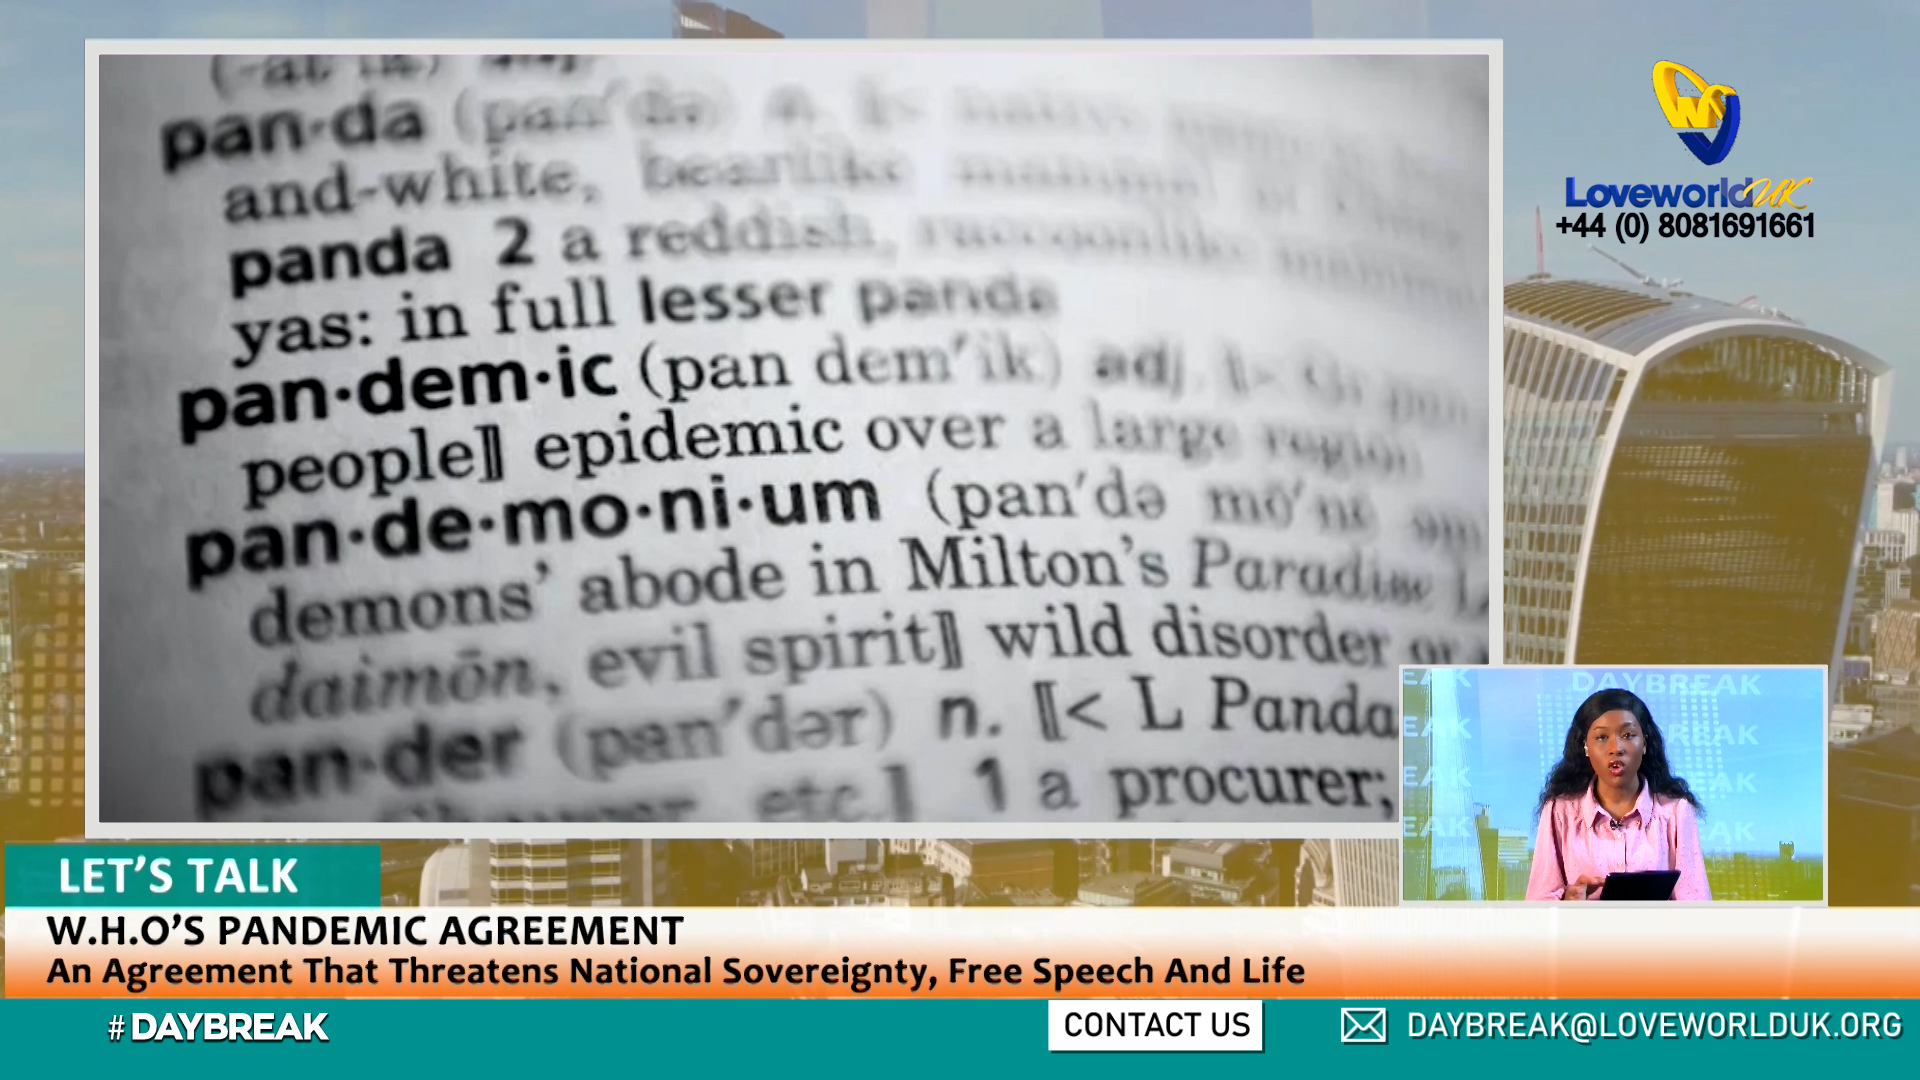 EP 5 - W.H.O’S PANDEMIC AGREEMENT - An Agreement That Threatens National Sovereignty, Free Speech And Life (PART 1)